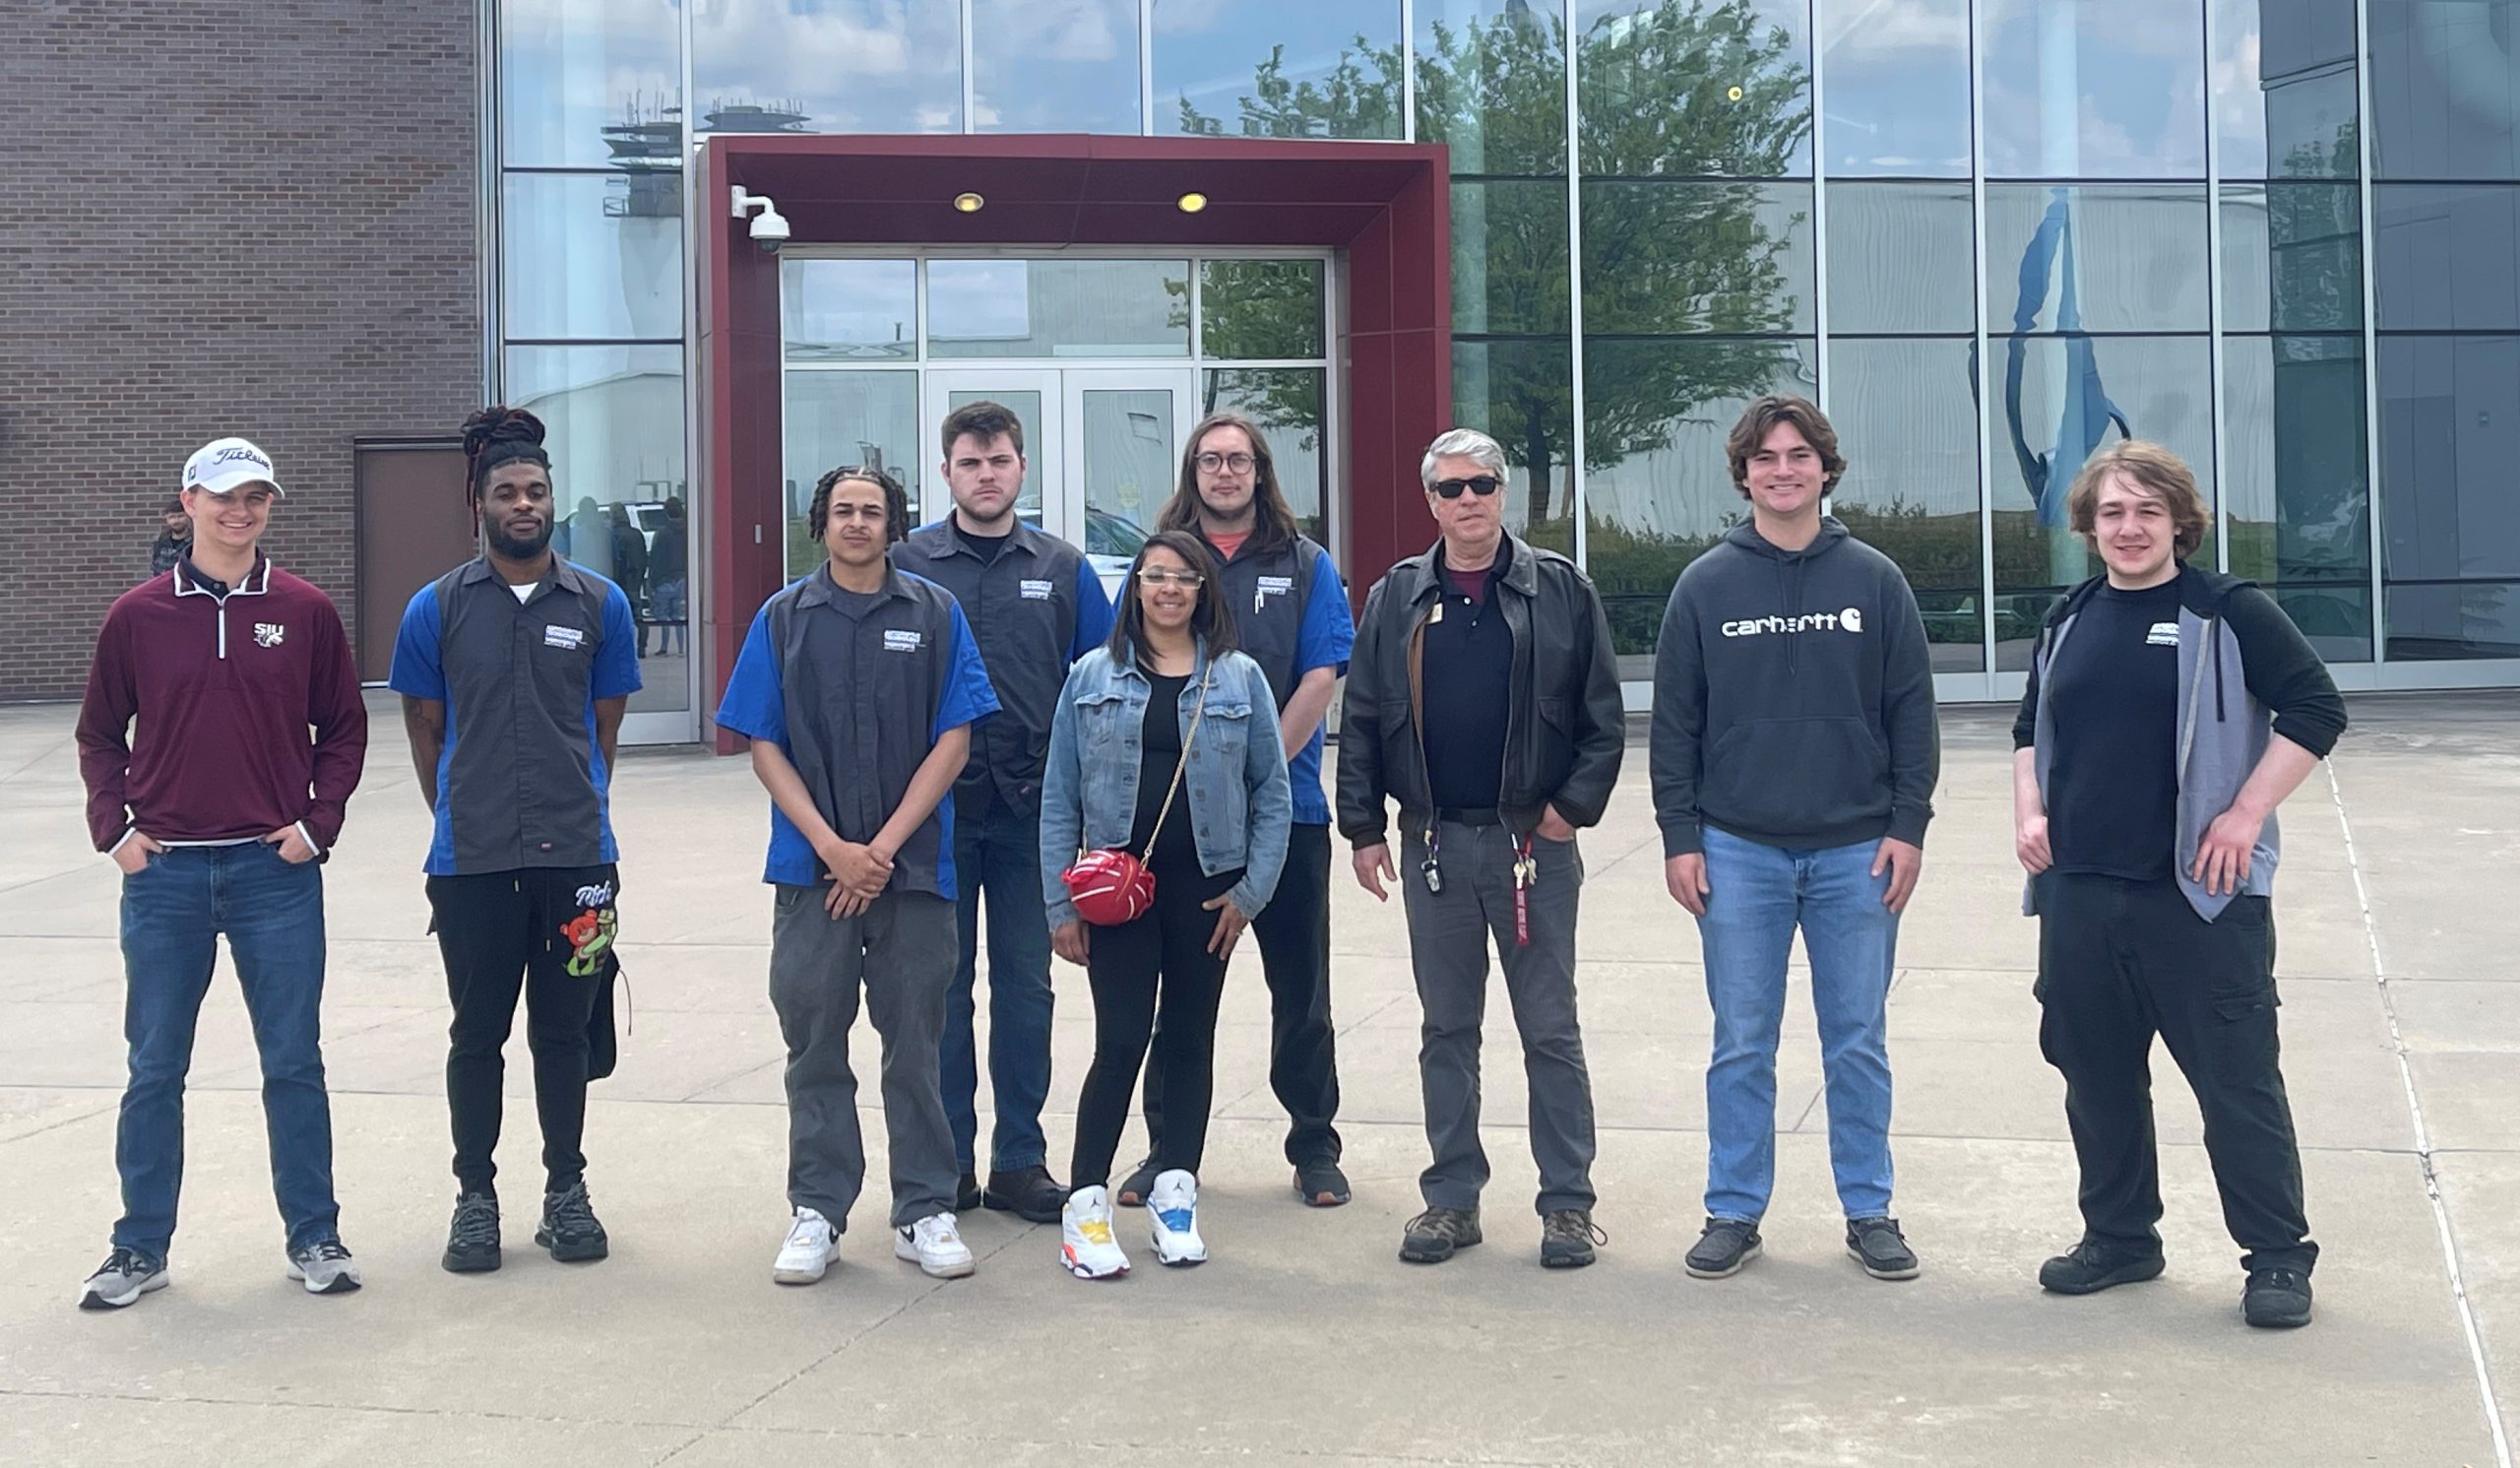 Eight LLCC student and Dave Pietrzak in front of Transportation Education Center building